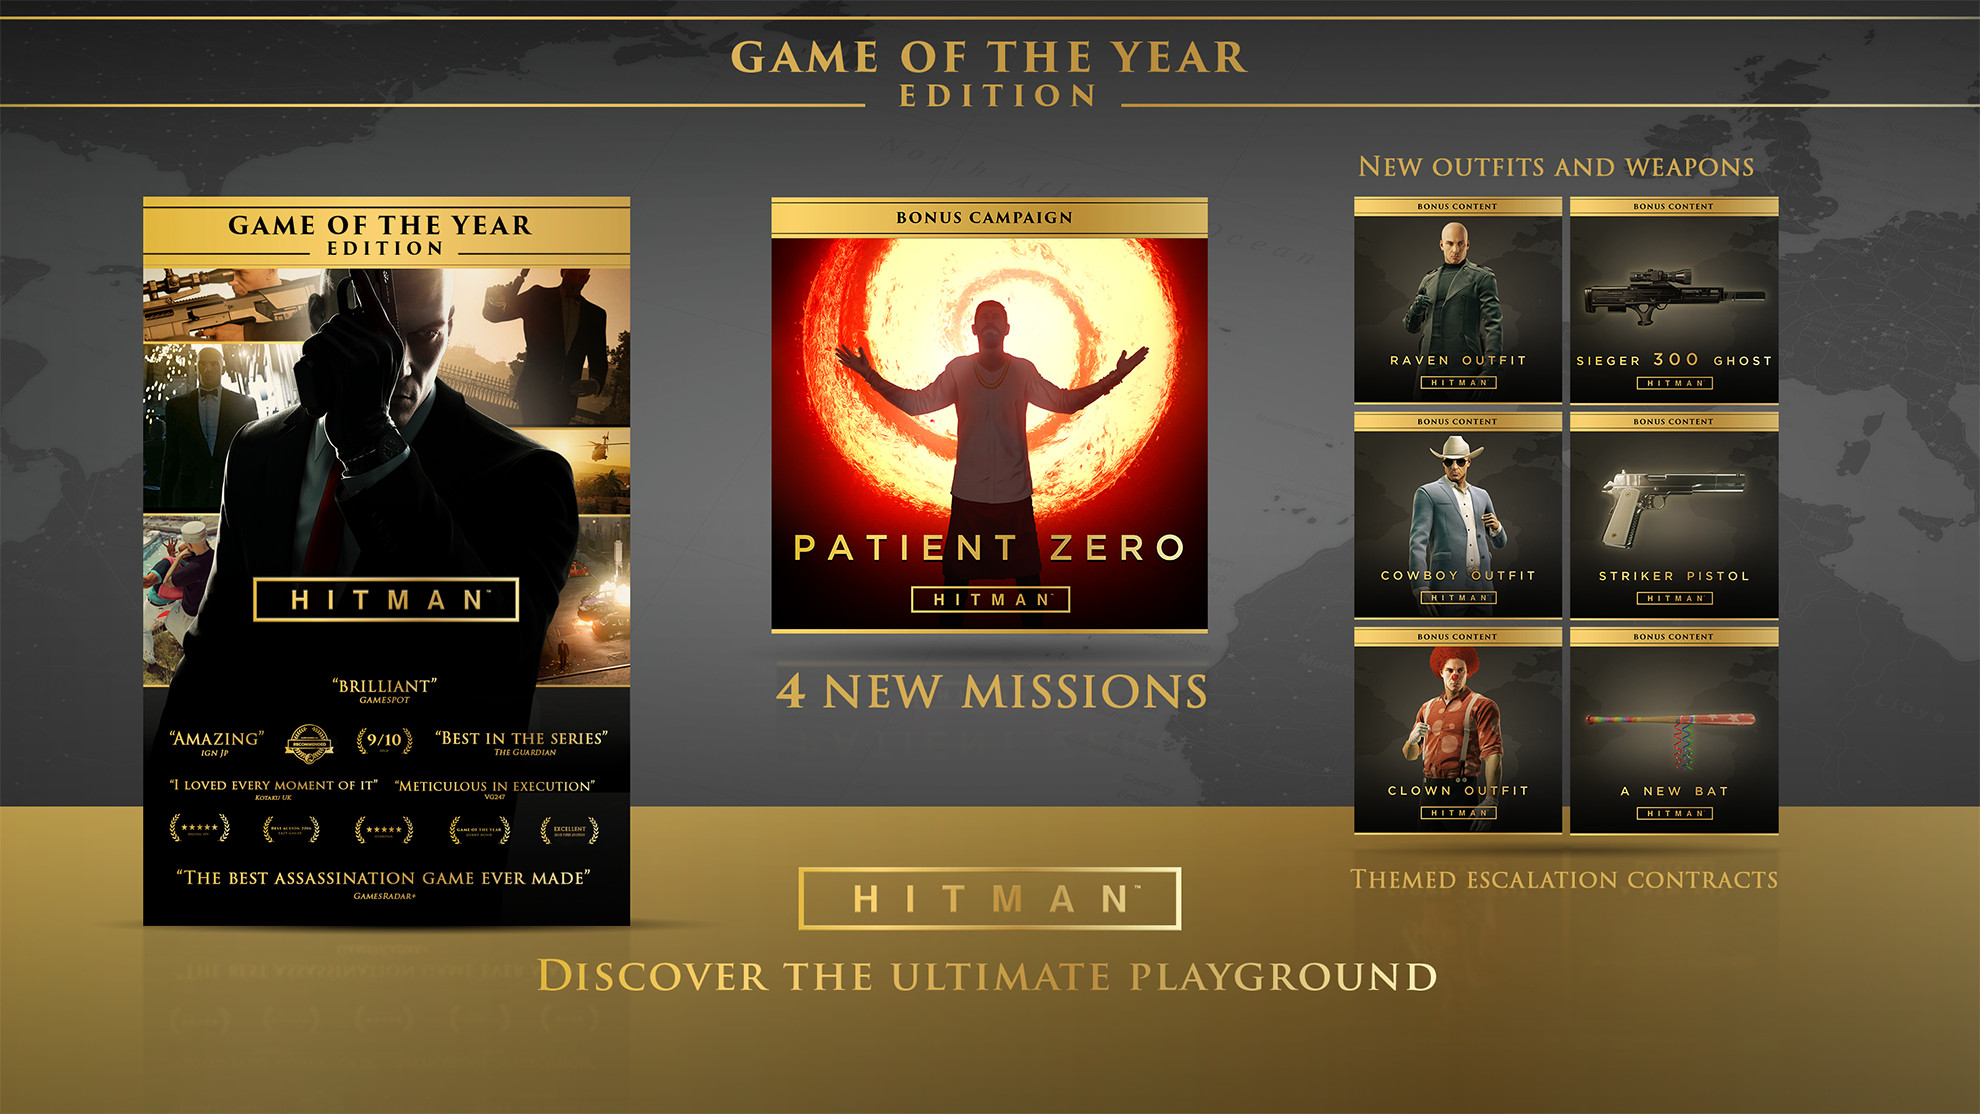 Visual identity for Game of the year edition.